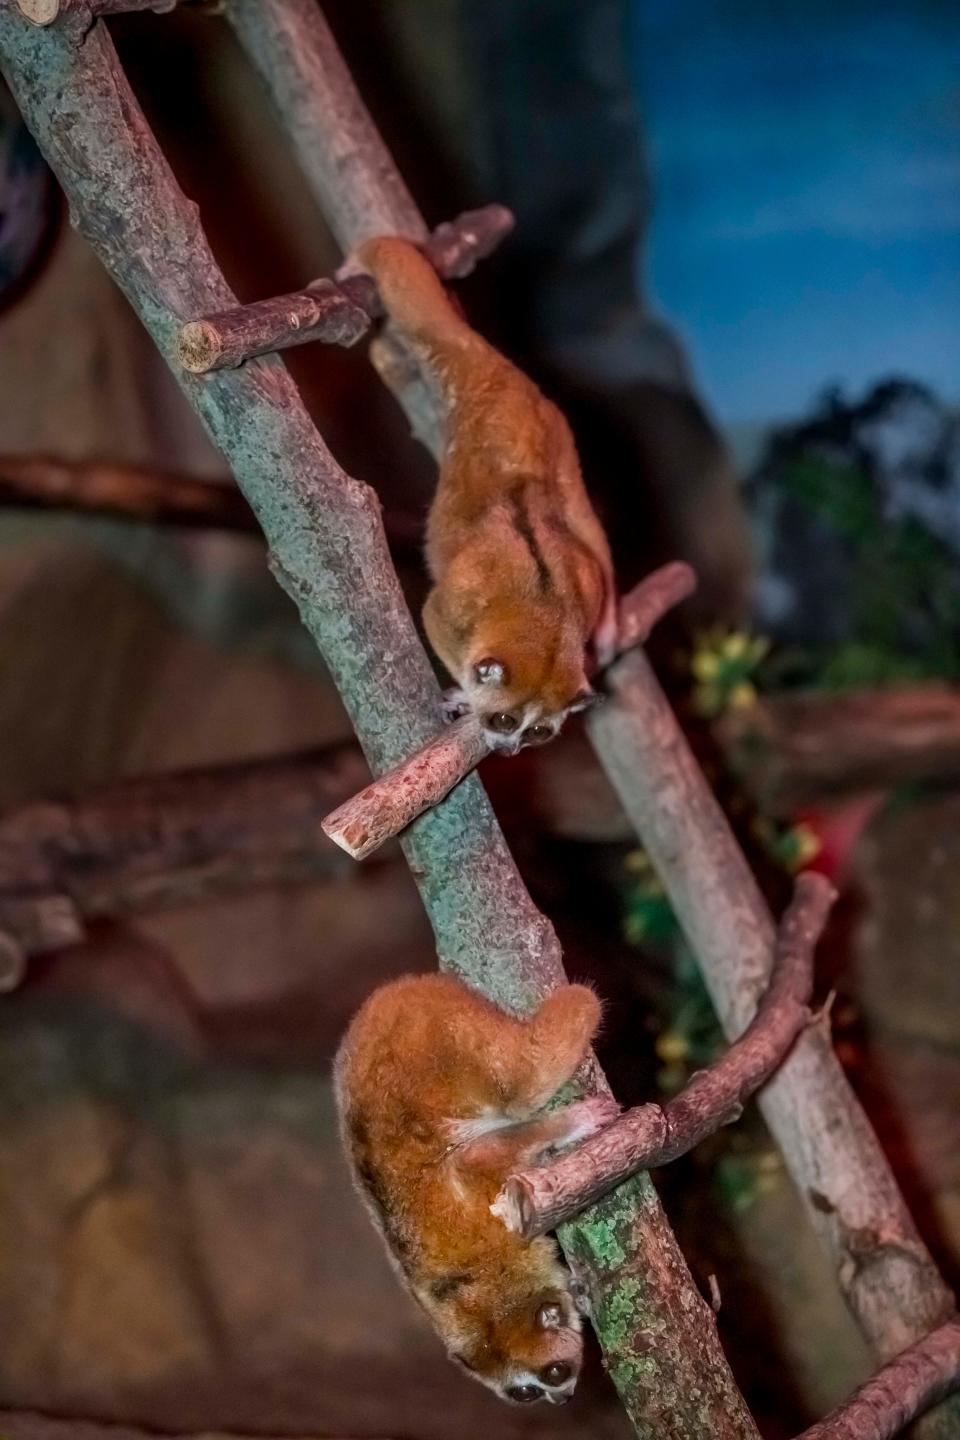 There are two pygmy slow lorises in the small mammals building at the Milwaukee County Zoo. Their names are Henderson and Chantu.